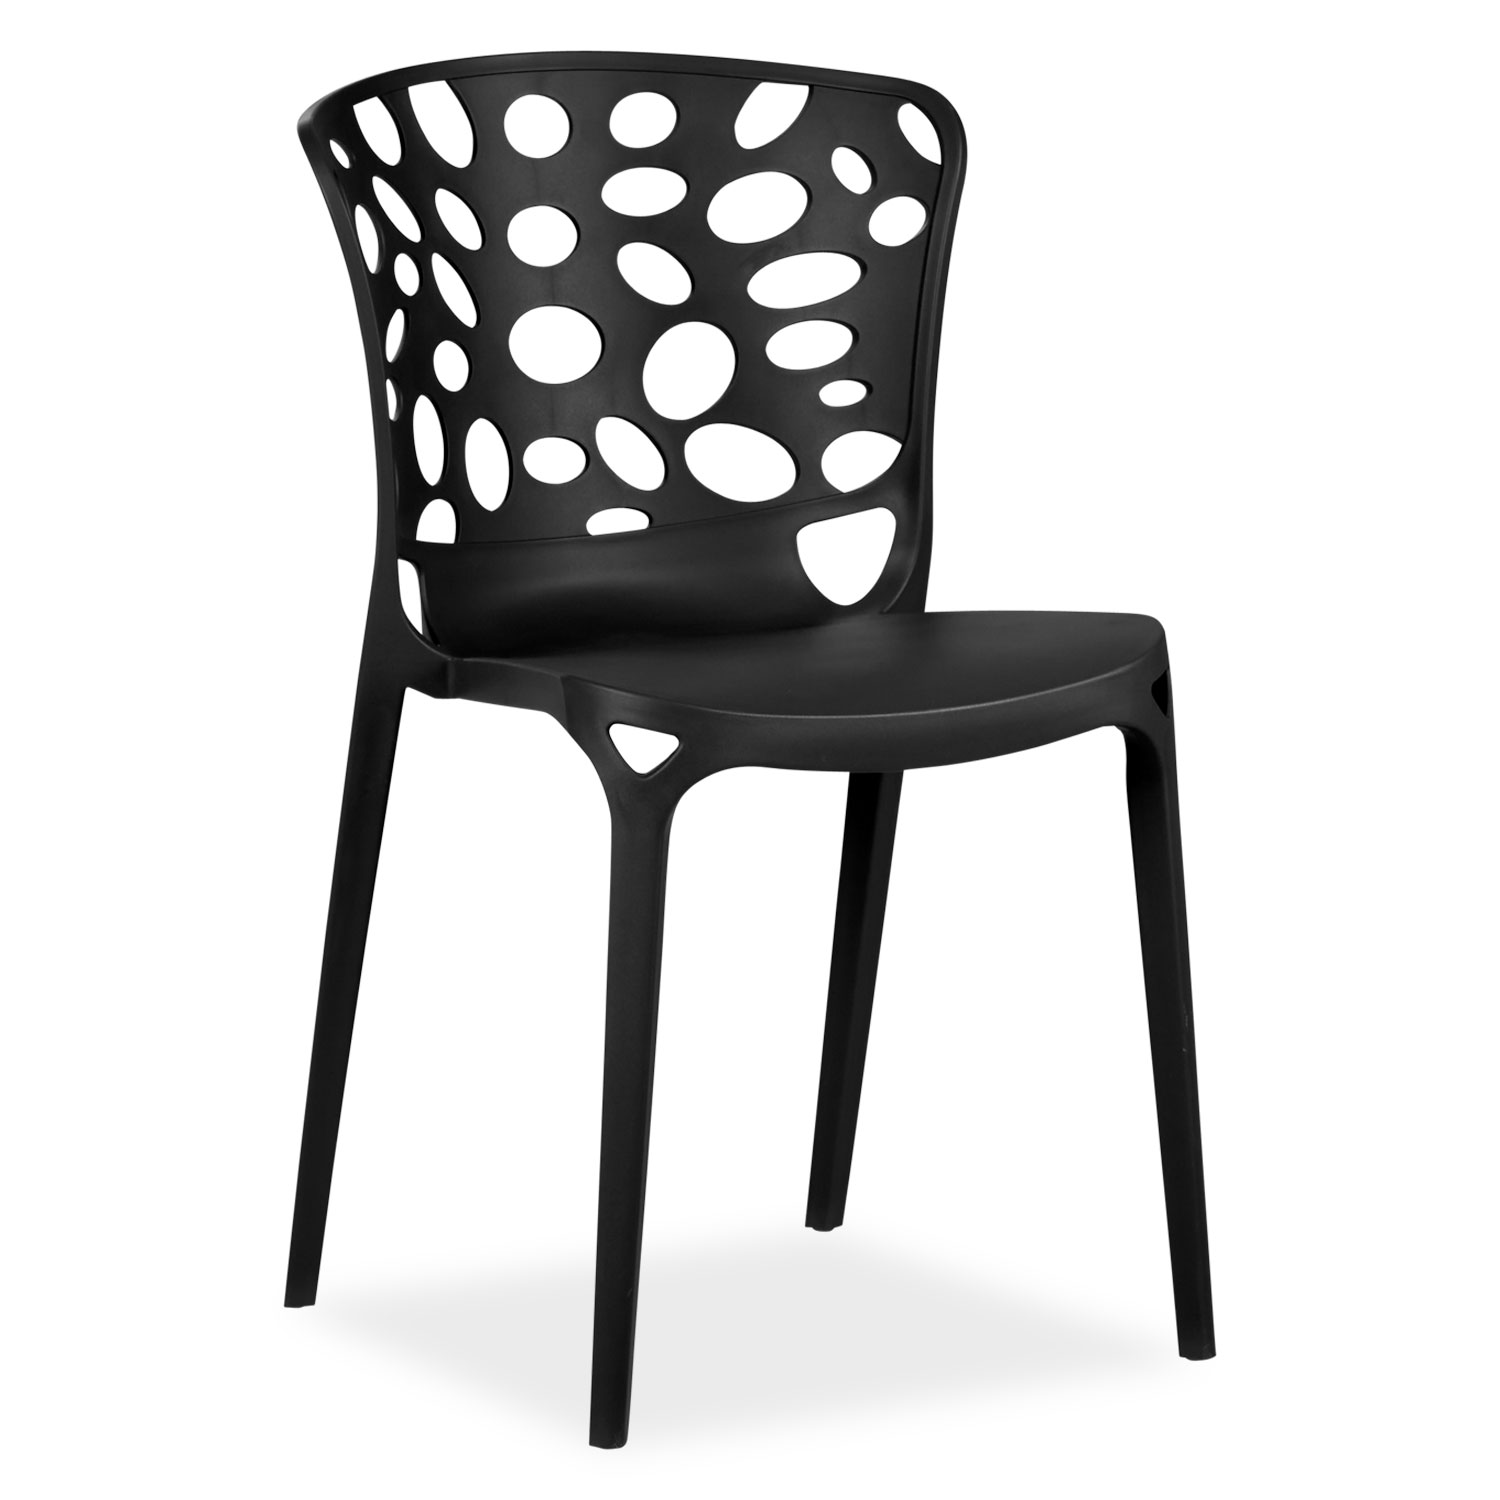 Garden chair Set of 2 Modern Black Camping chairs Outdoor chairs Plastic Stacking chairs Kitchen chairs